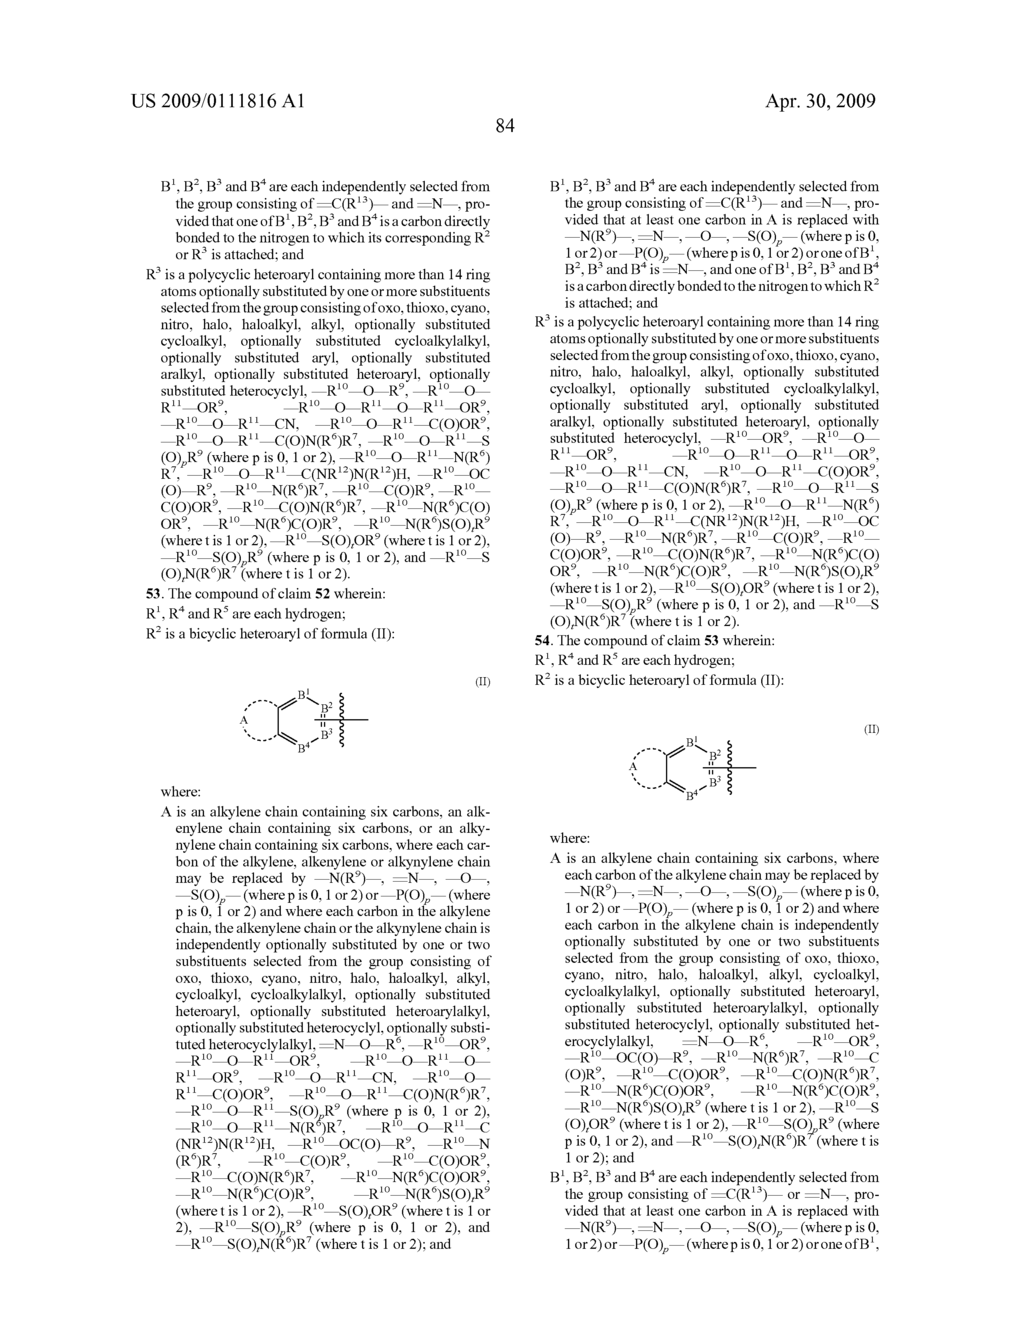 POLYCYCLIC ARYL SUBSTITUTED TRIAZOLES AND POLYCYCLIC HETEROARYL SUBSTITUTED TRIAZOLES USEFUL AS AXL INHIBITORS - diagram, schematic, and image 85